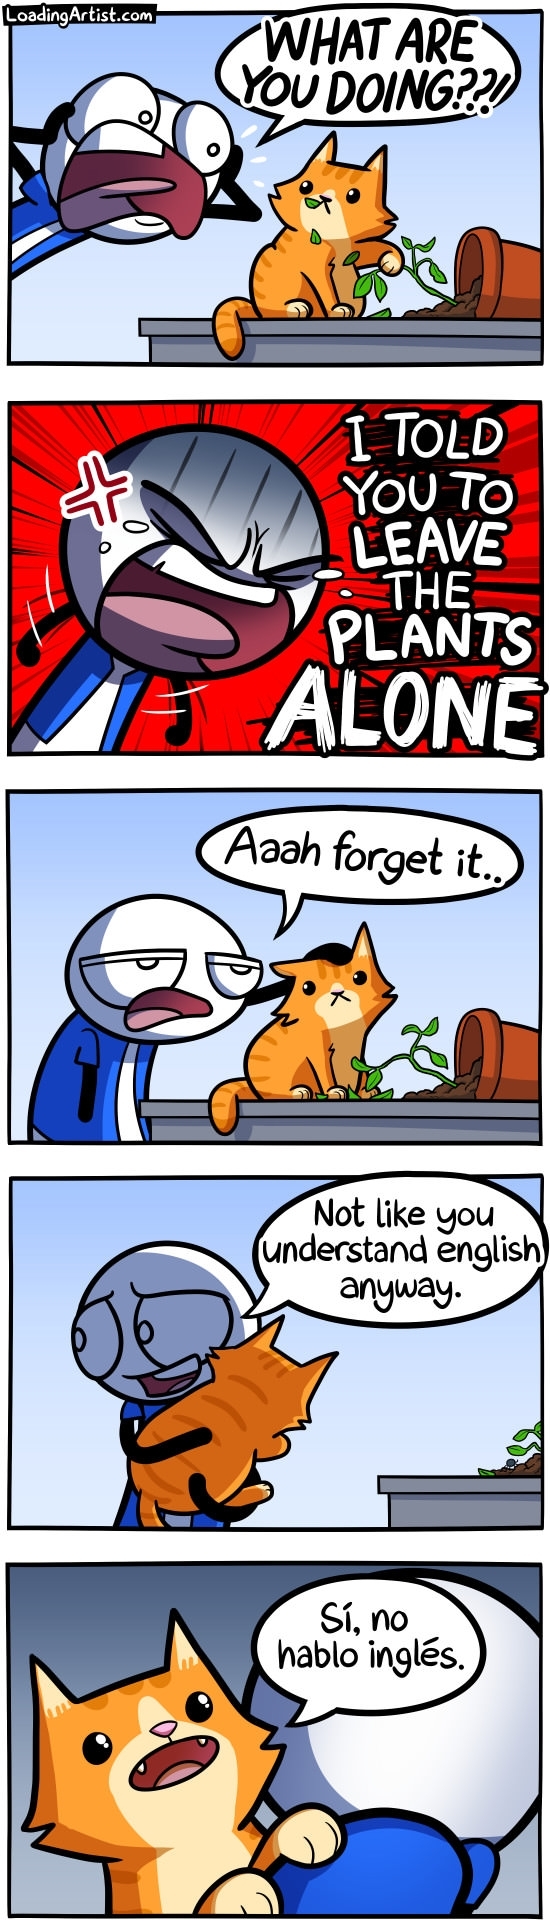 Leave the plants alone 